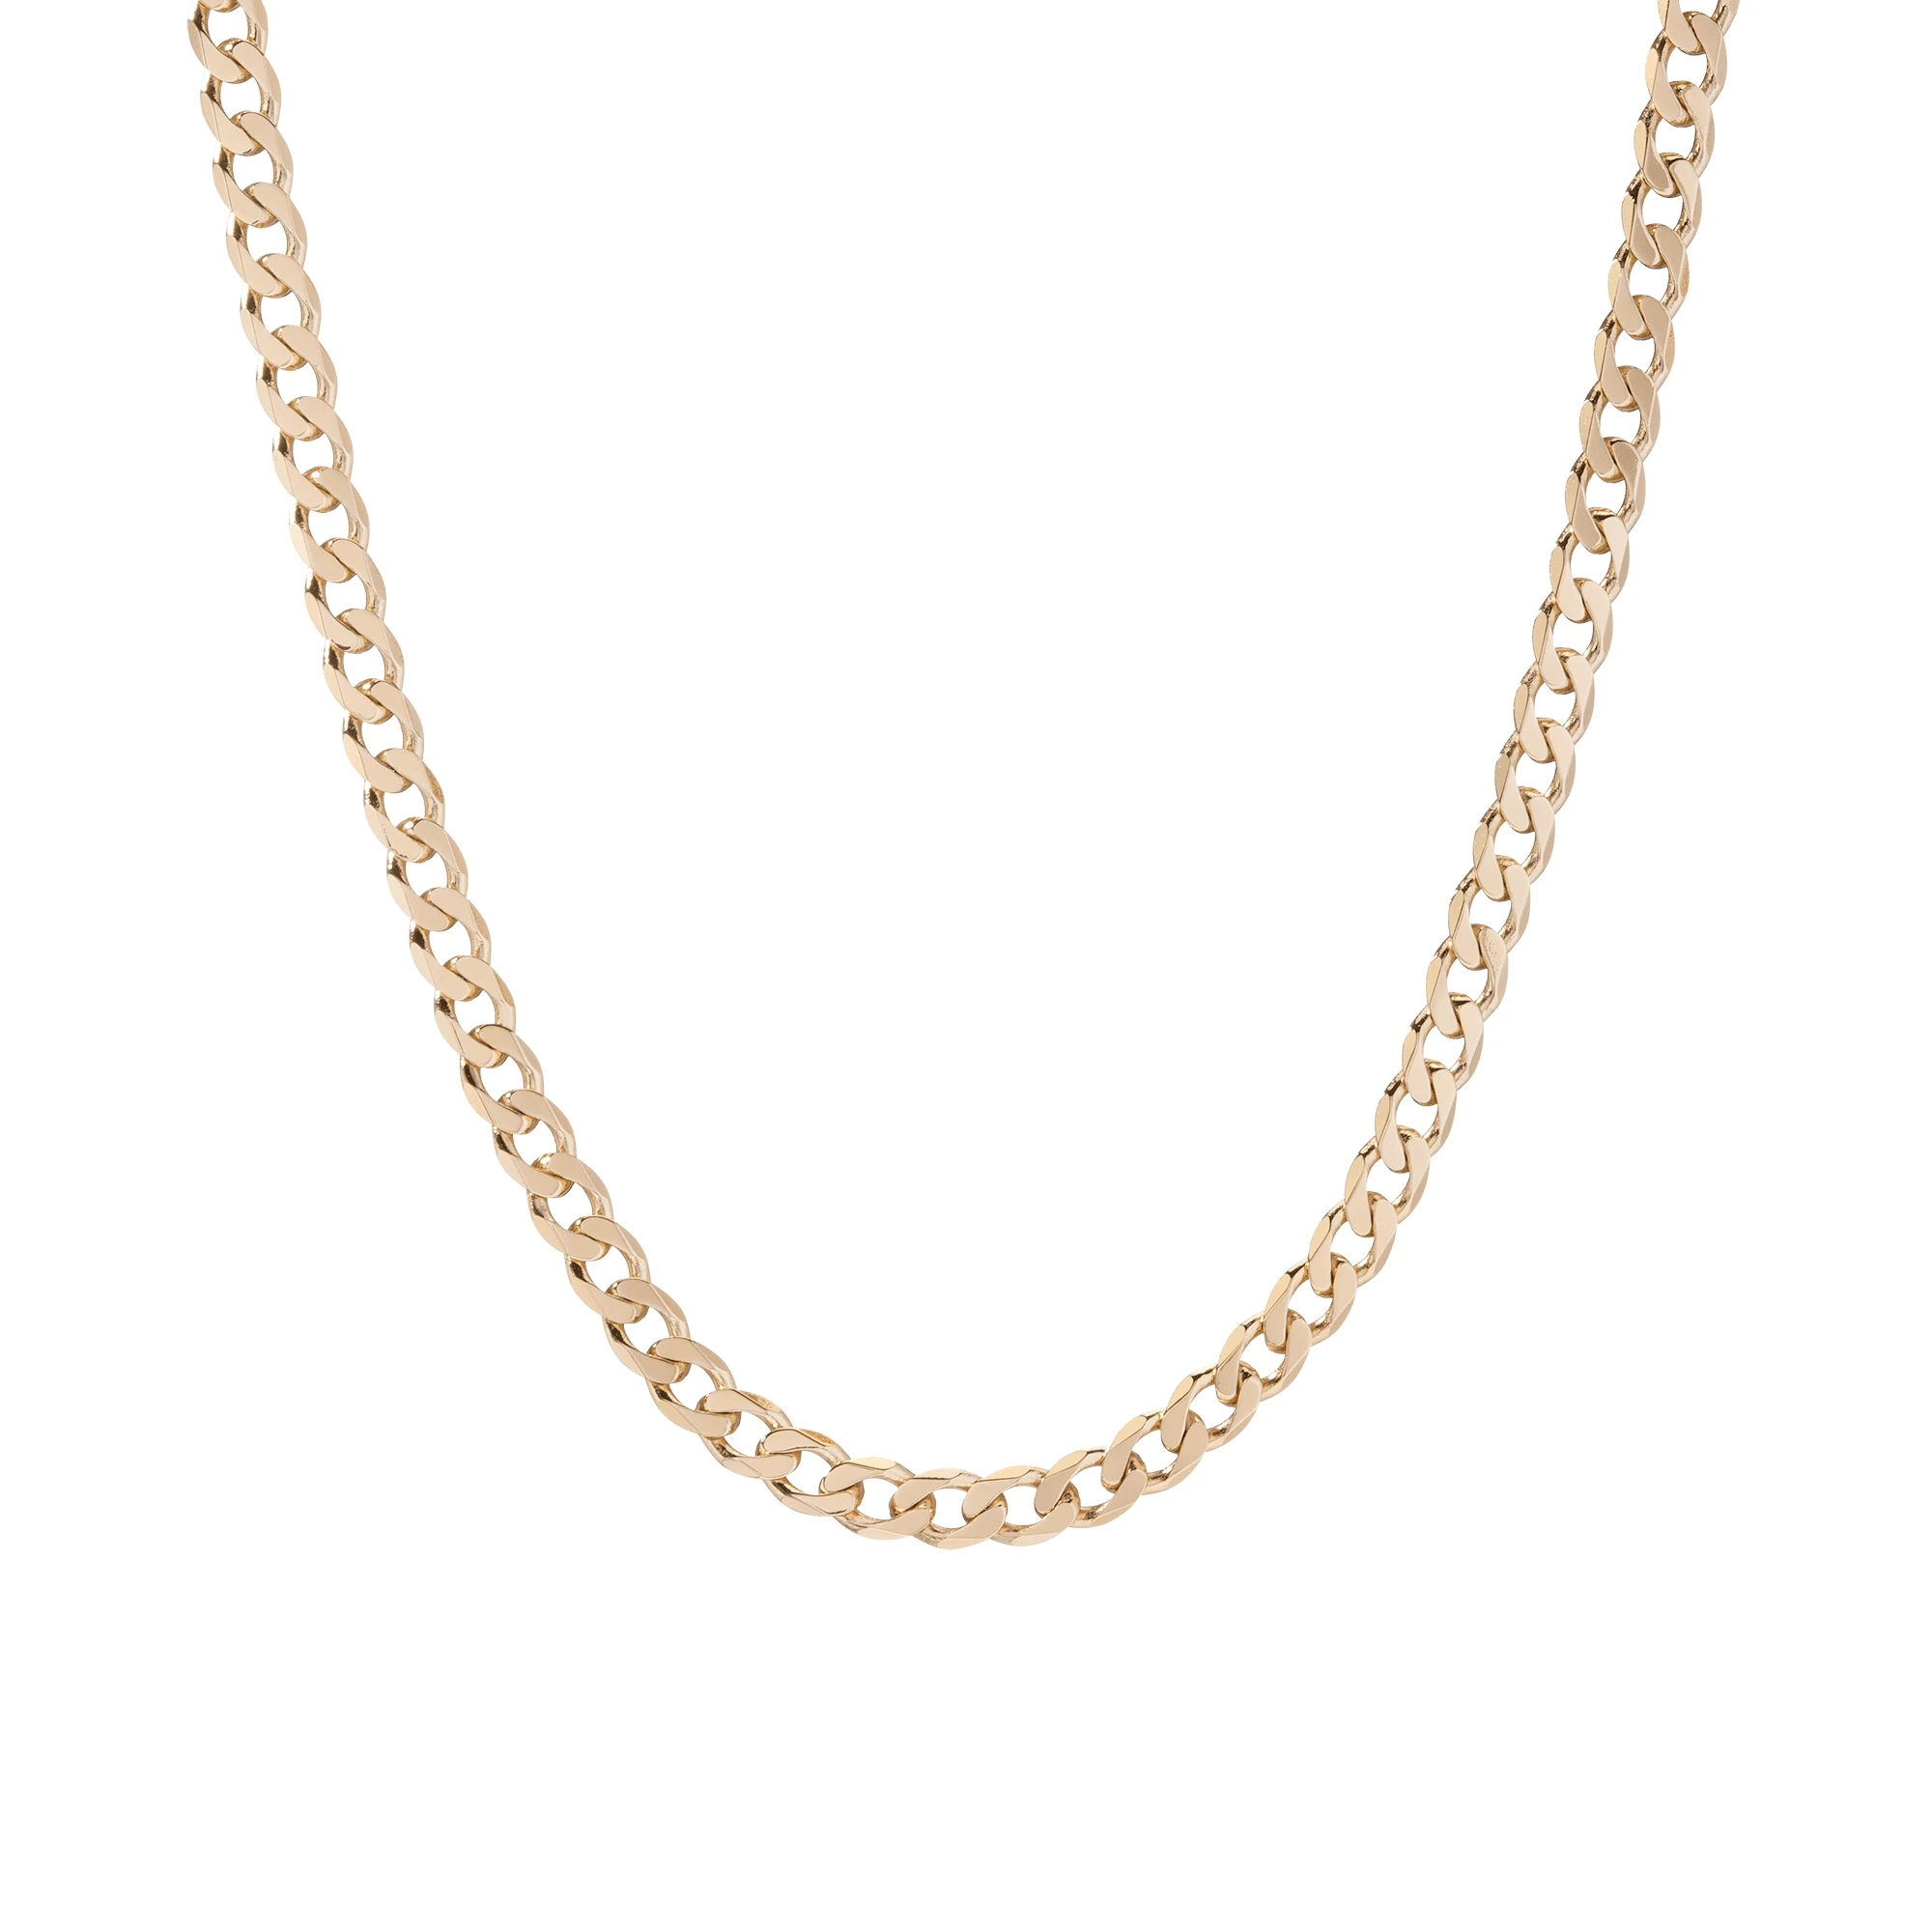 

Wholesale Gold Filled Stainless Steel Hip Hop Bold Stand-alone Chain Cuban Links XL Gold Curb Chain Necklace for Women Men, Gold,silver,rose gold